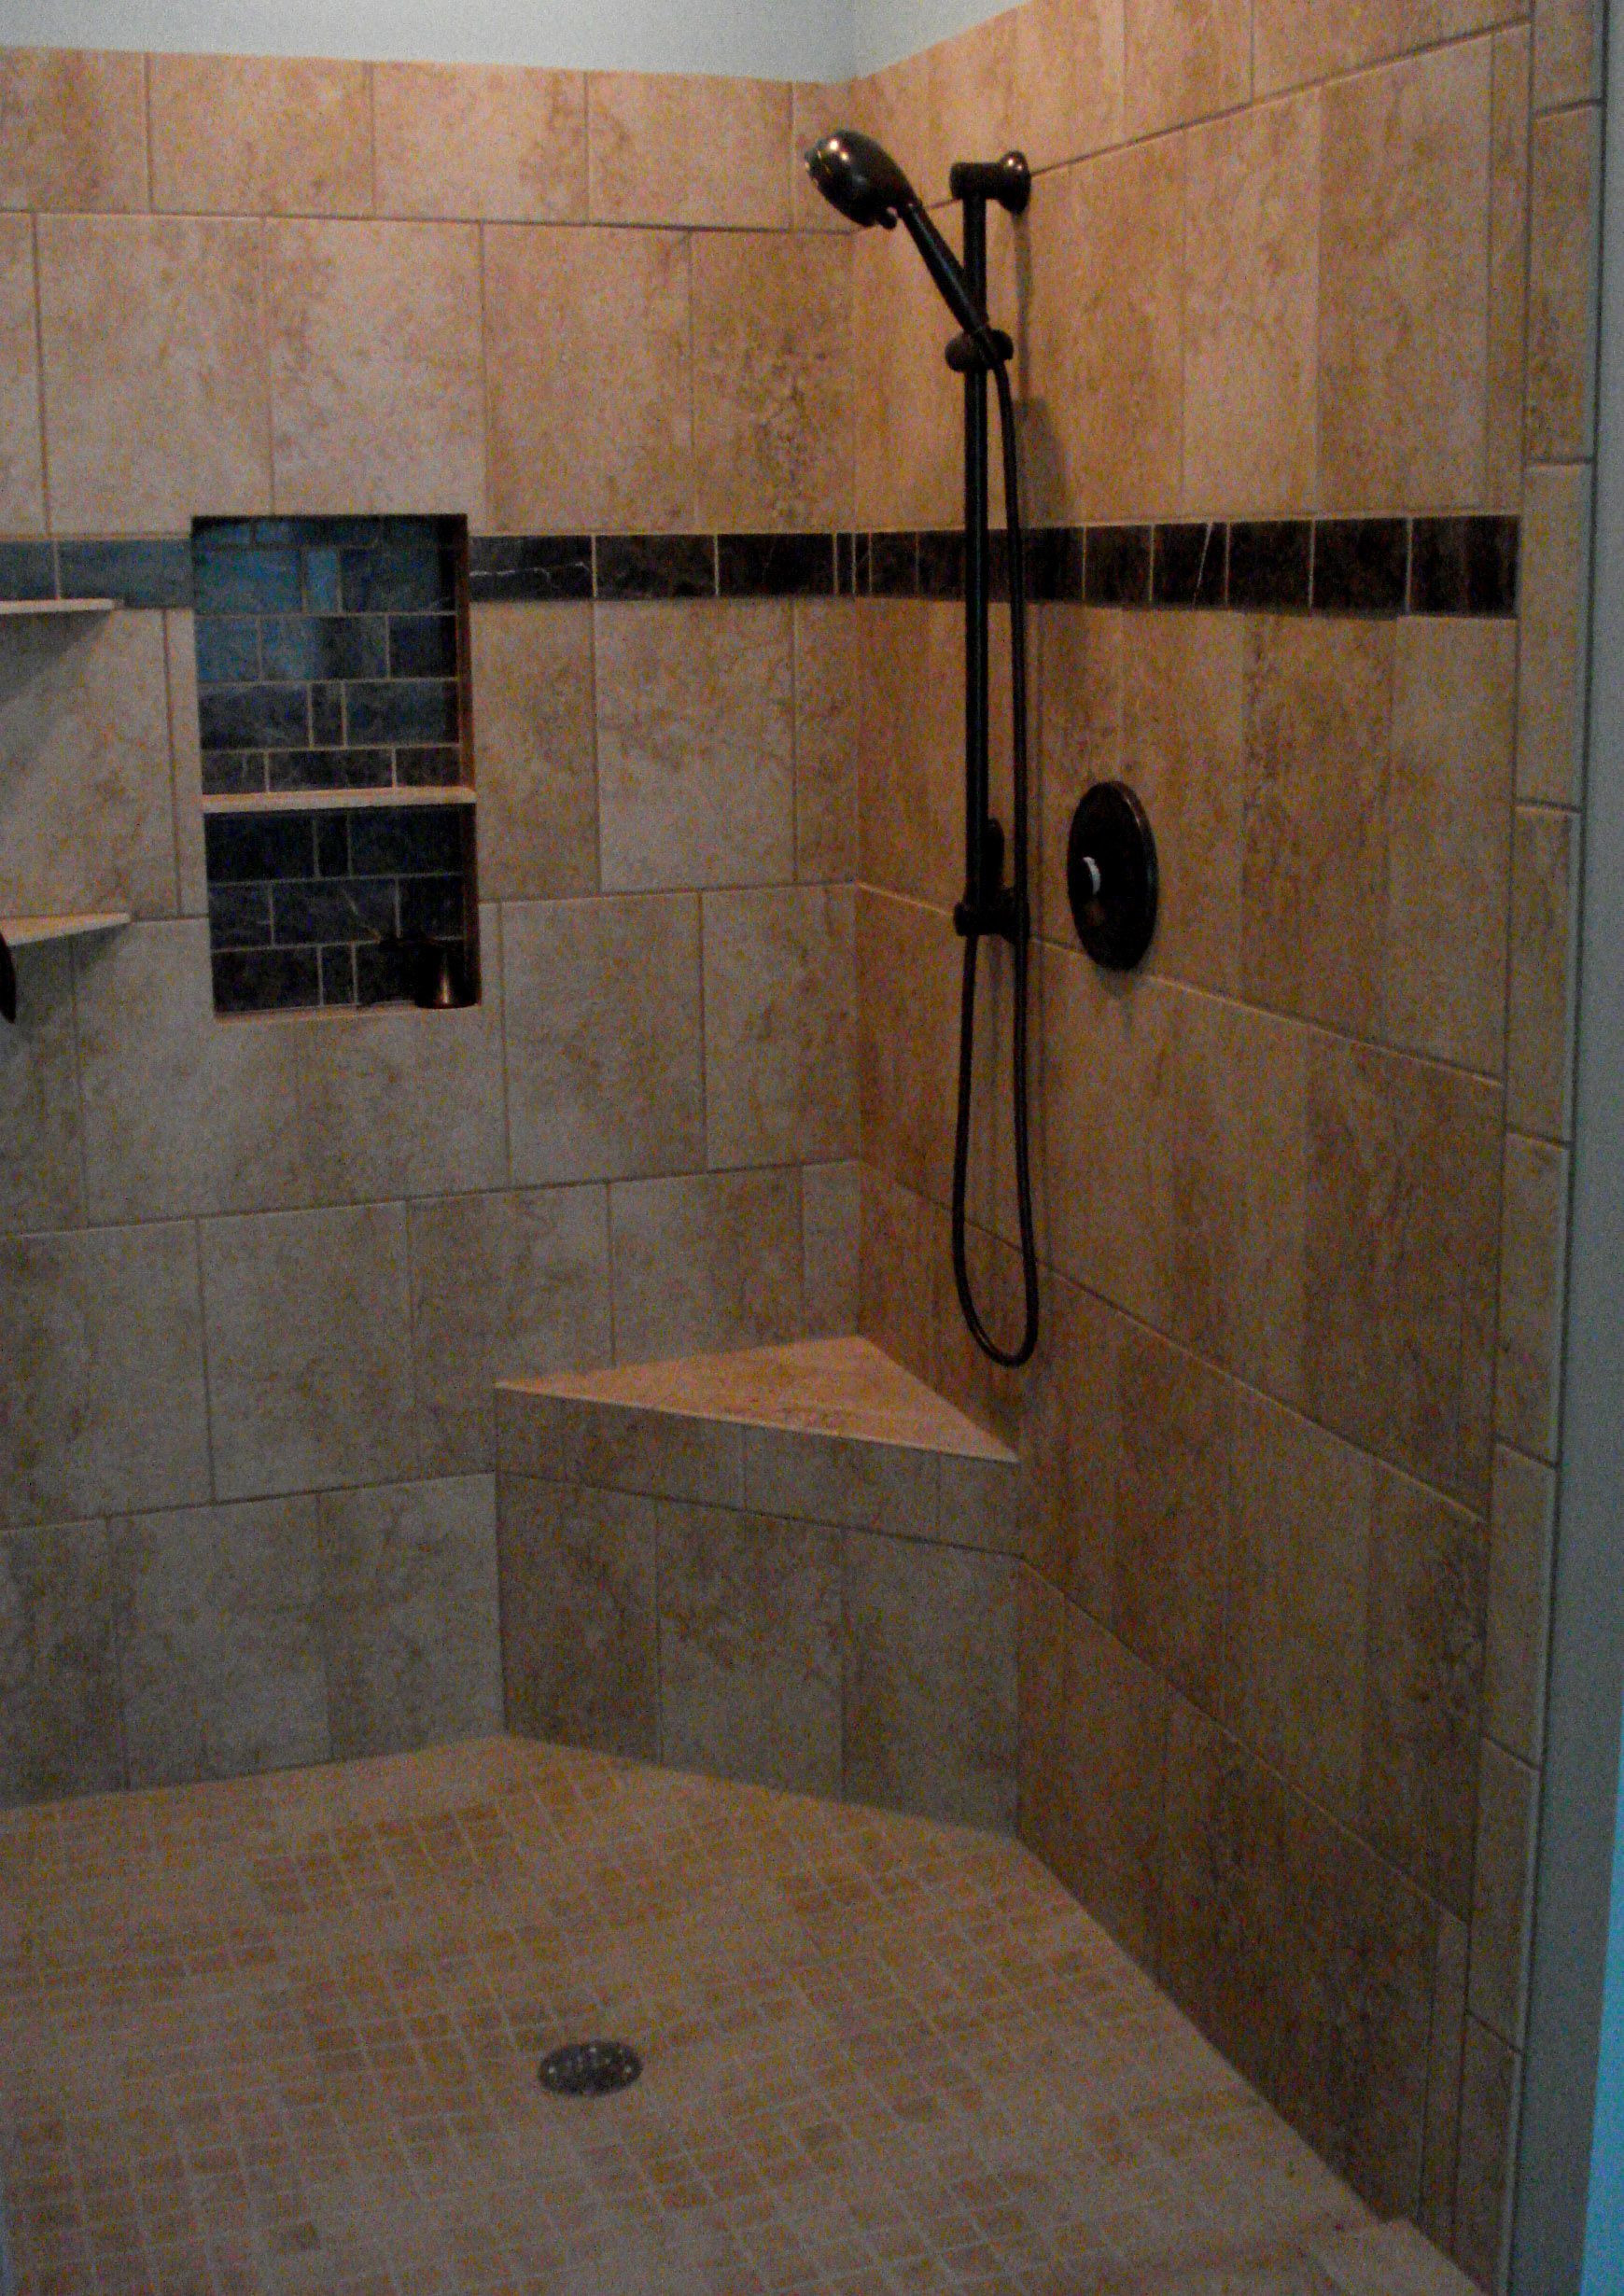 Bathroom Tile Ideas Pictures
 Tile Shower Ideas Affecting the Appearance of the Space